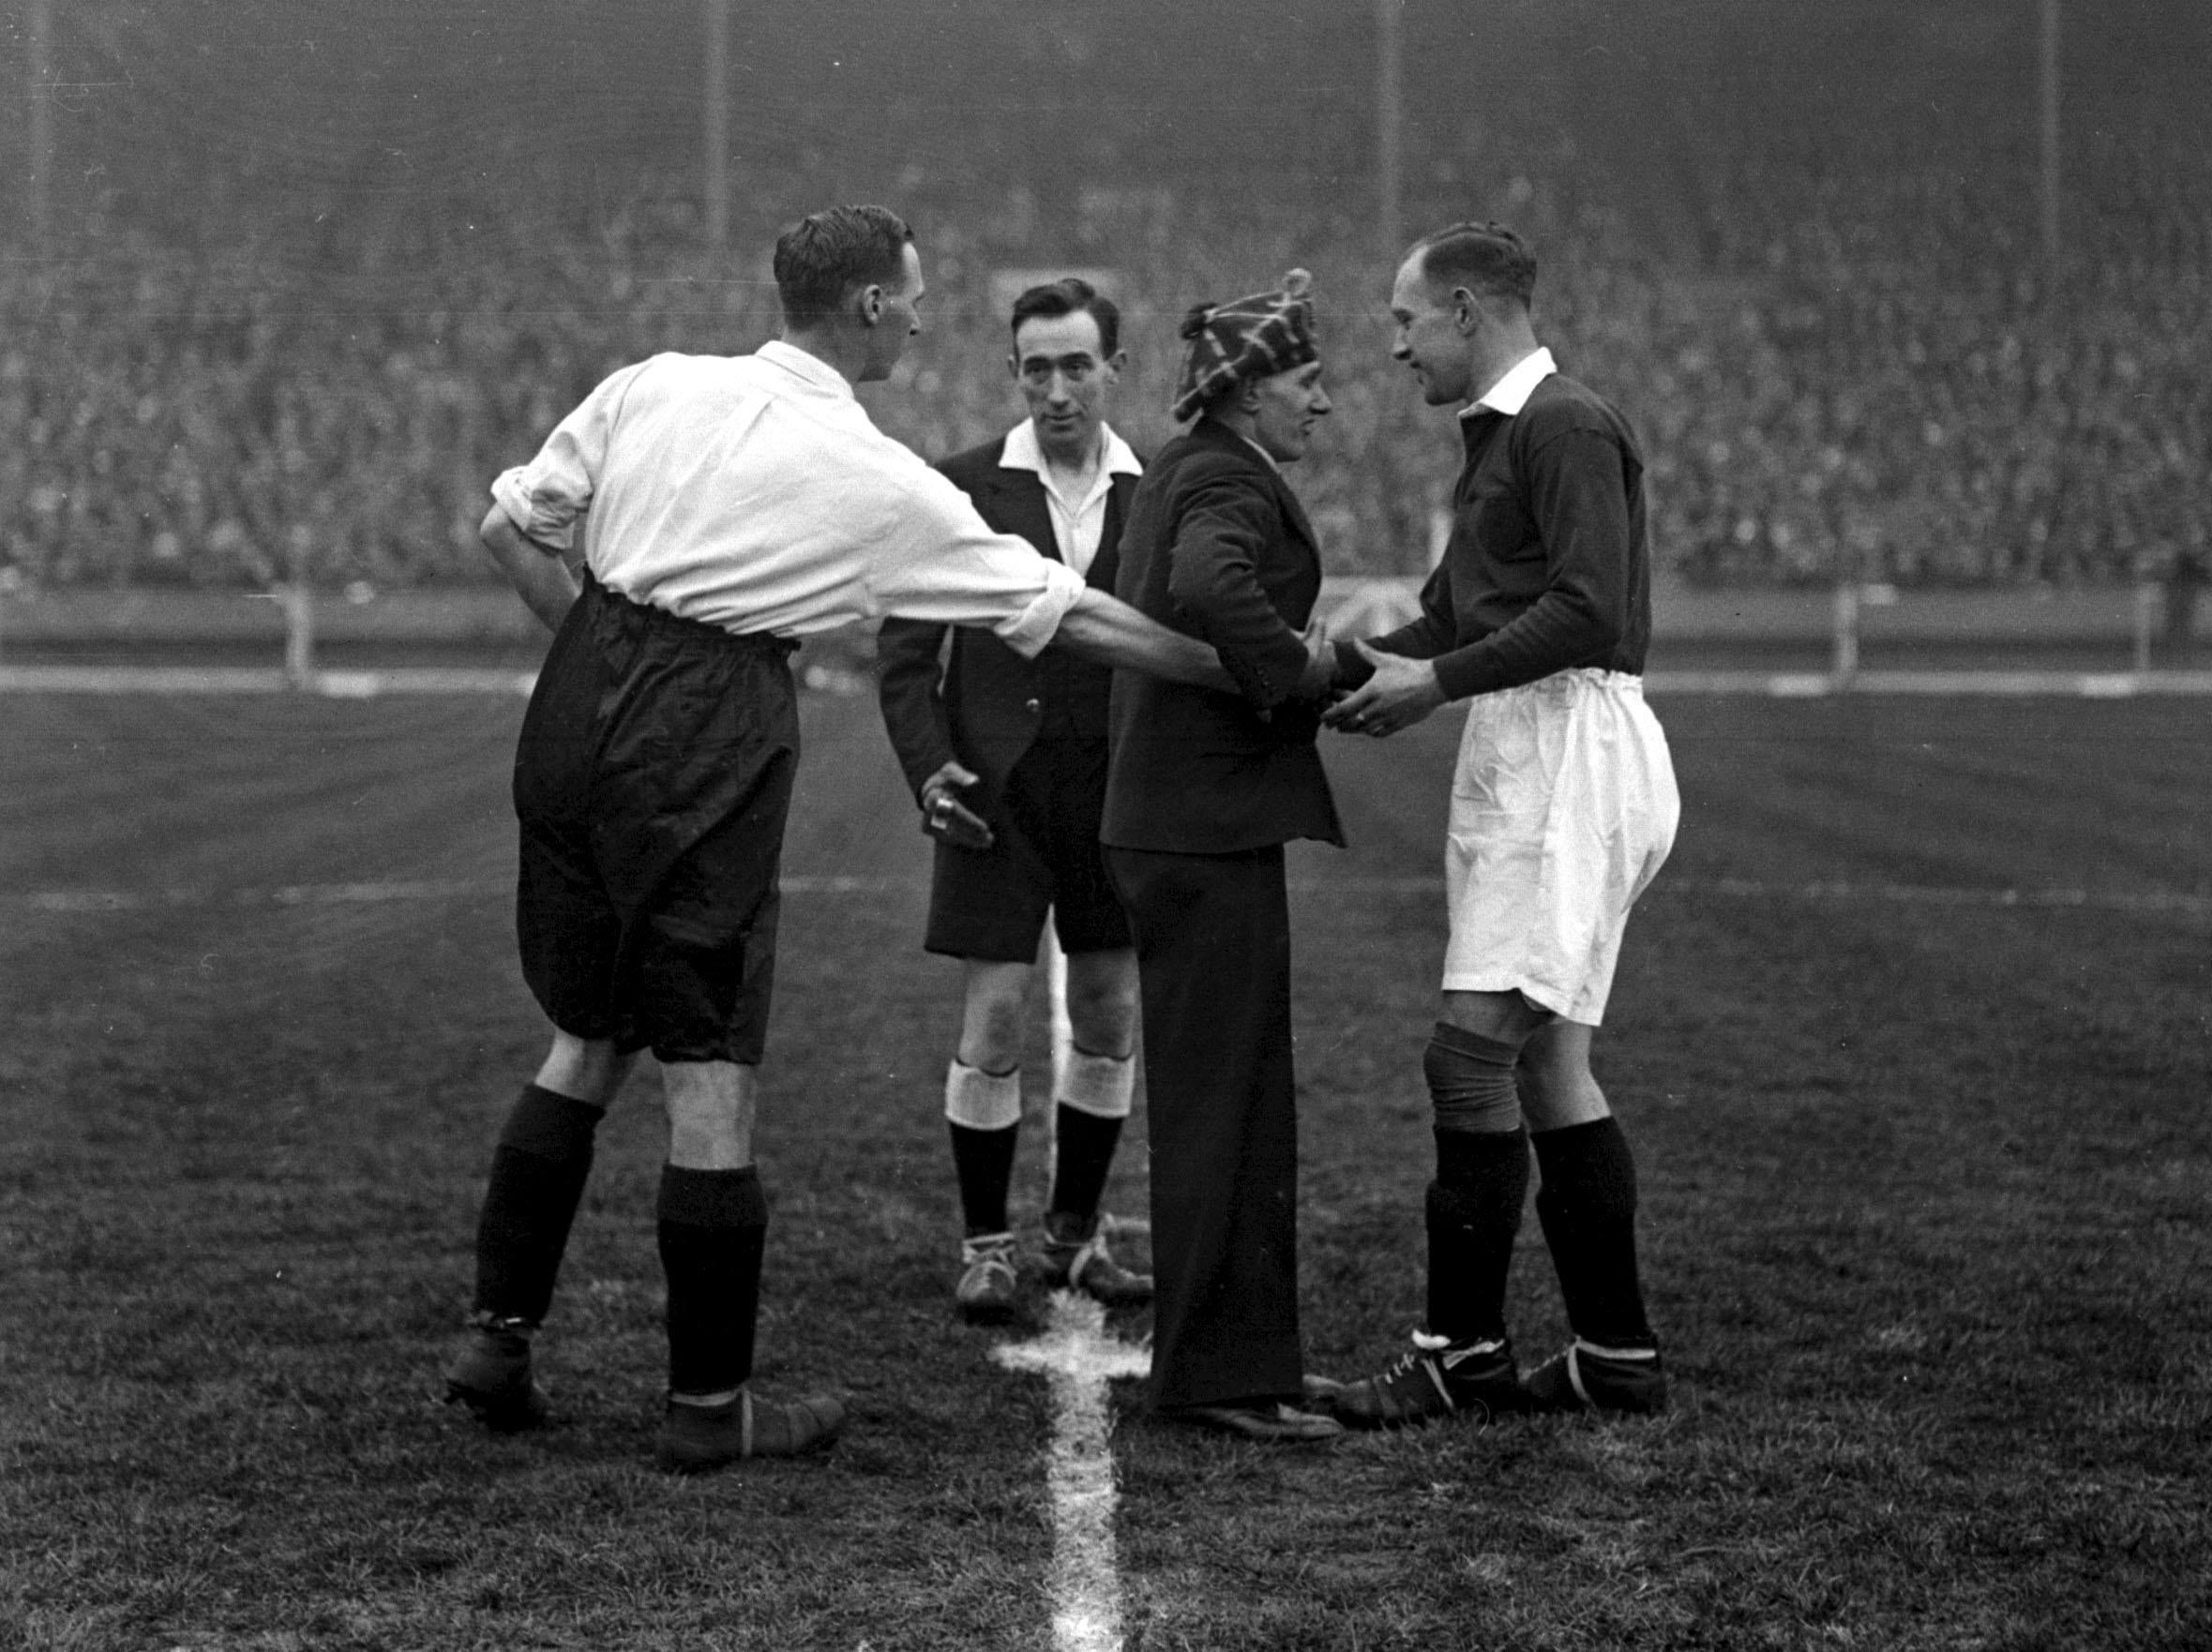 An equaliser from David Jack, left, secured a 3-3 draw for England with Germany in May 1930 (PA)